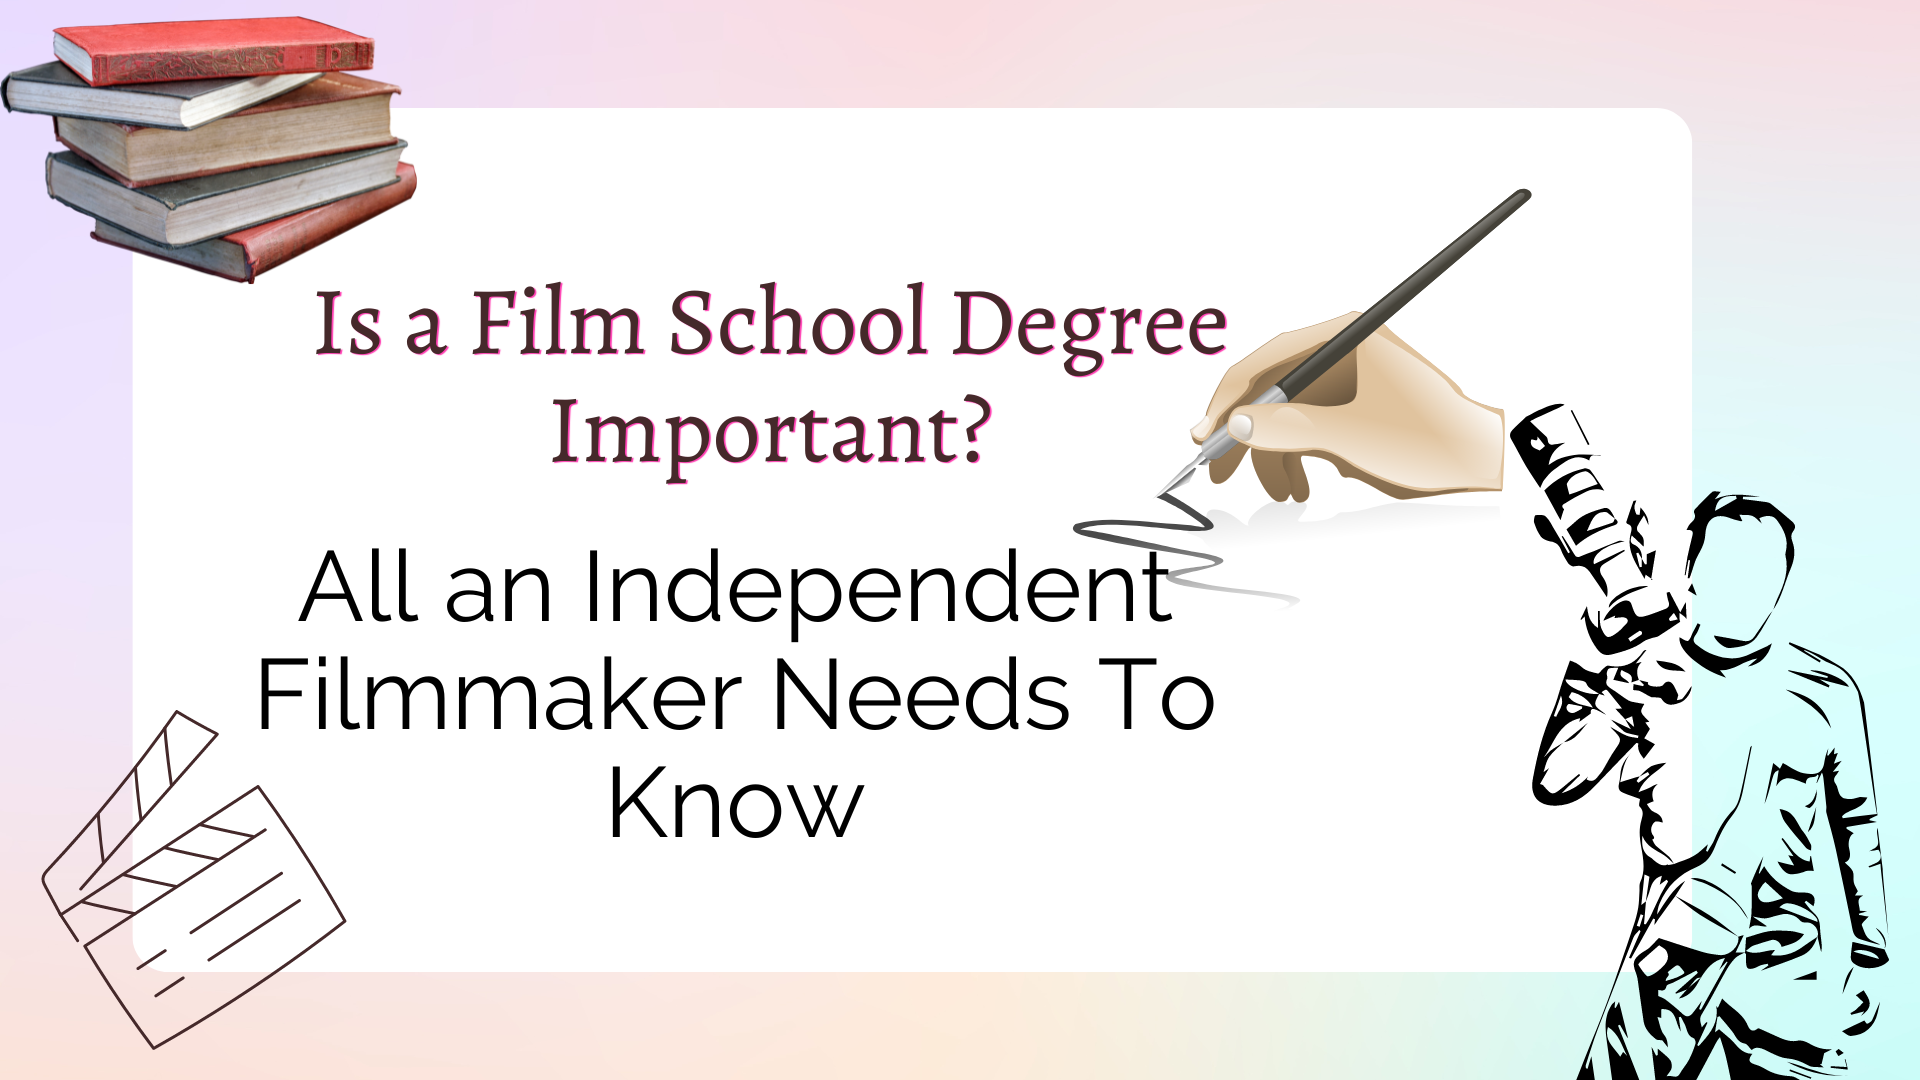 Is Film School Degree Important: All an Independent Filmmaker Needs To Know